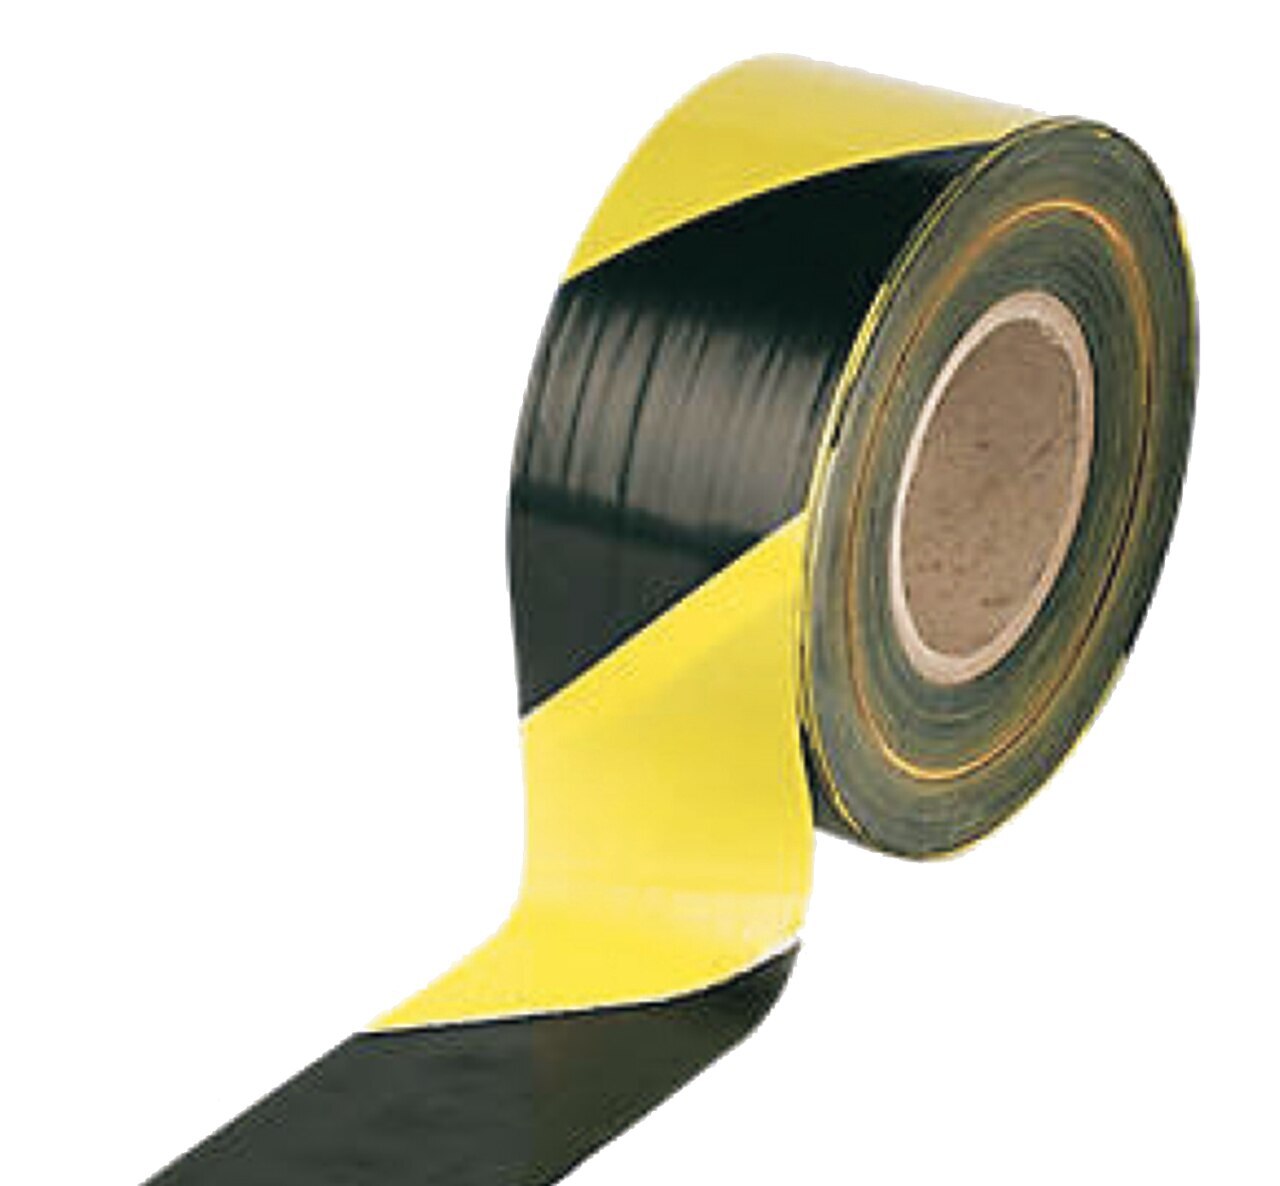 10 Metre Workplace Safety Reflective Tape - Black & Yellow